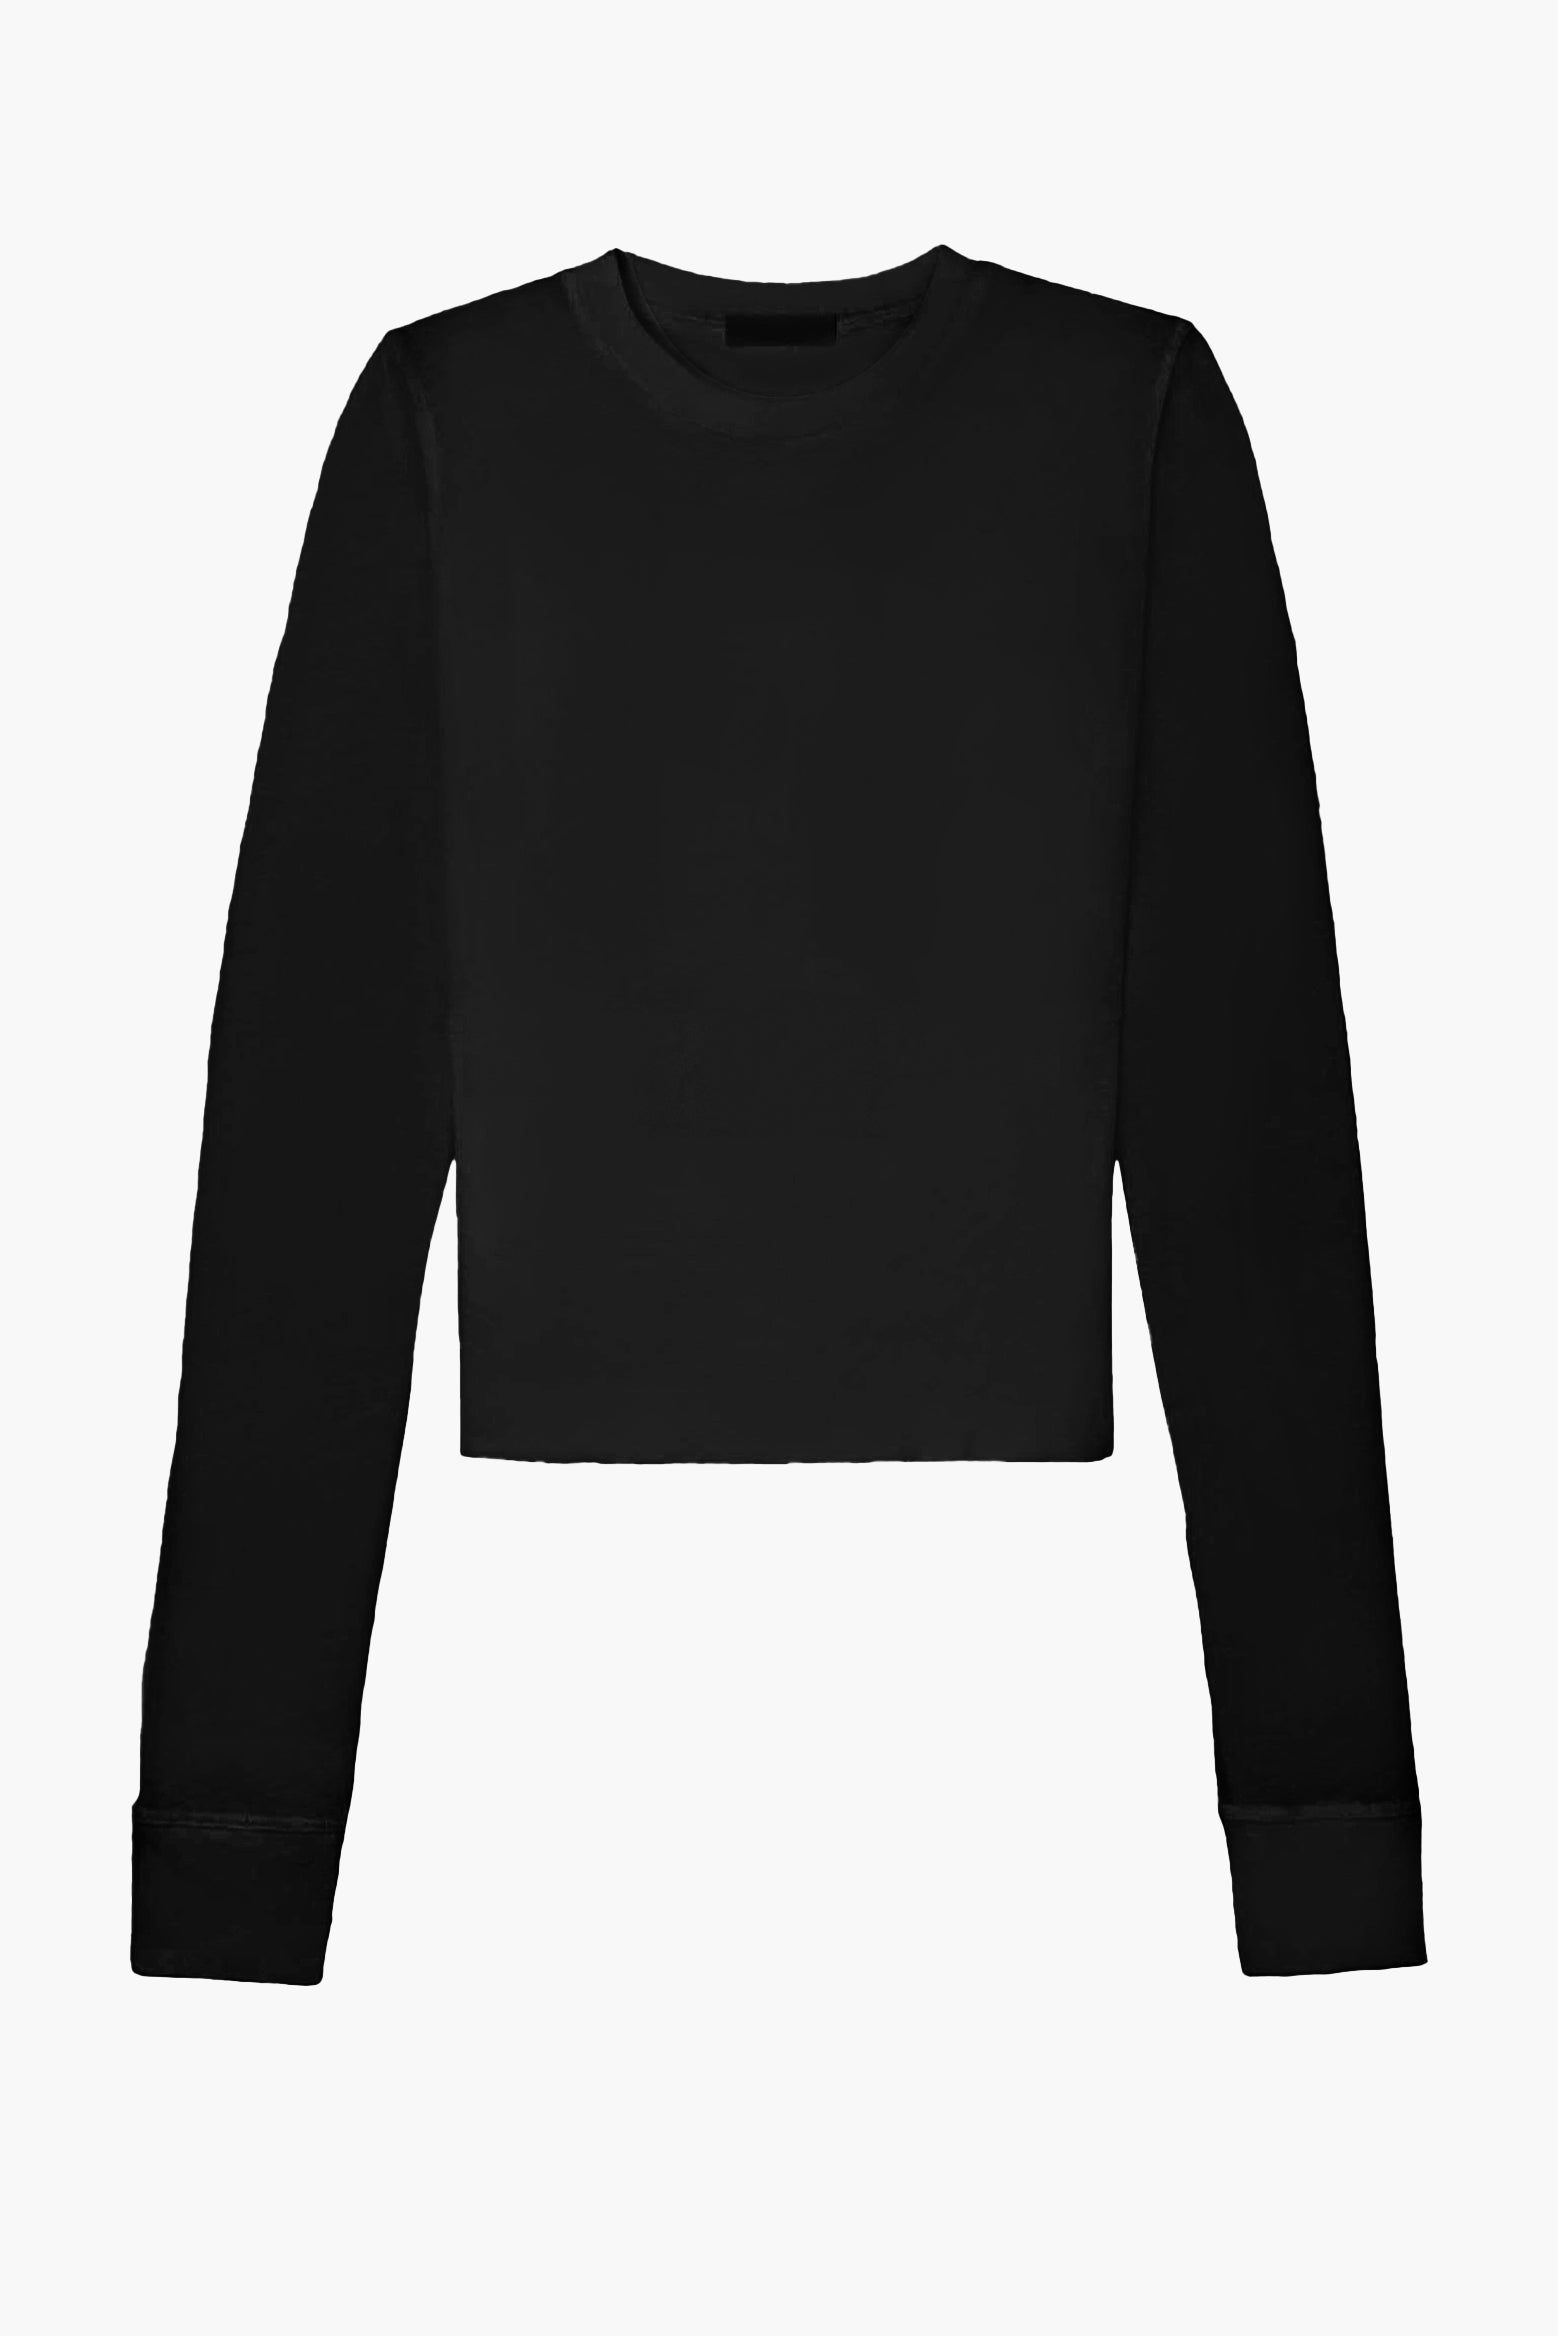 The Wardrobe NYC Fitted Long Sleeve Tee in Black available at The New Trend Australia